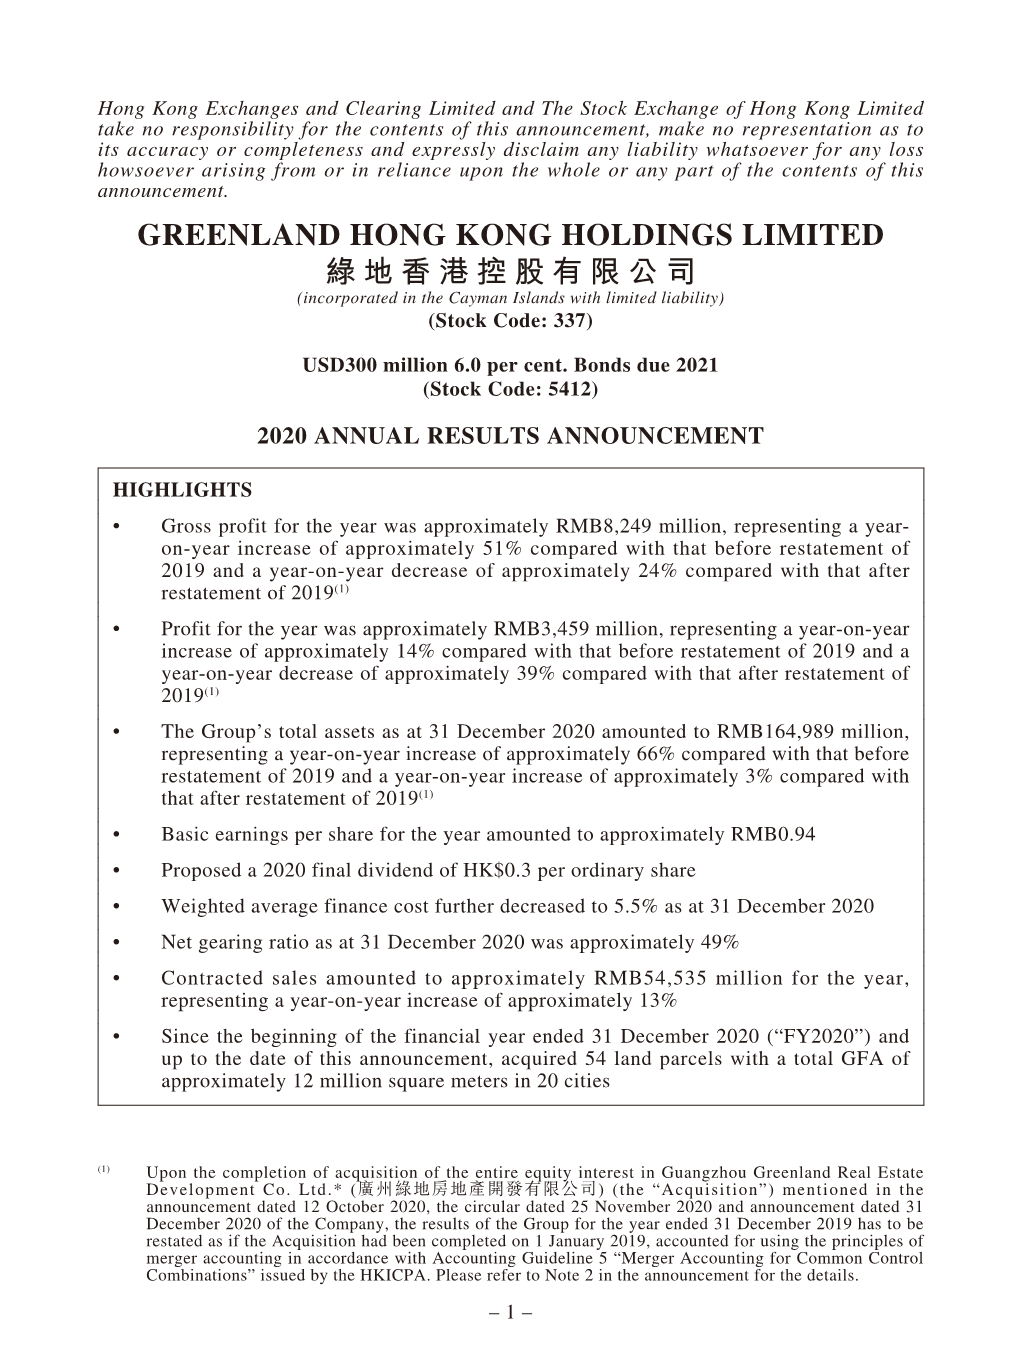 GREENLAND HONG KONG HOLDINGS LIMITED 綠地香港控股有限公司 (Incorporated in the Cayman Islands with Limited Liability) (Stock Code: 337)